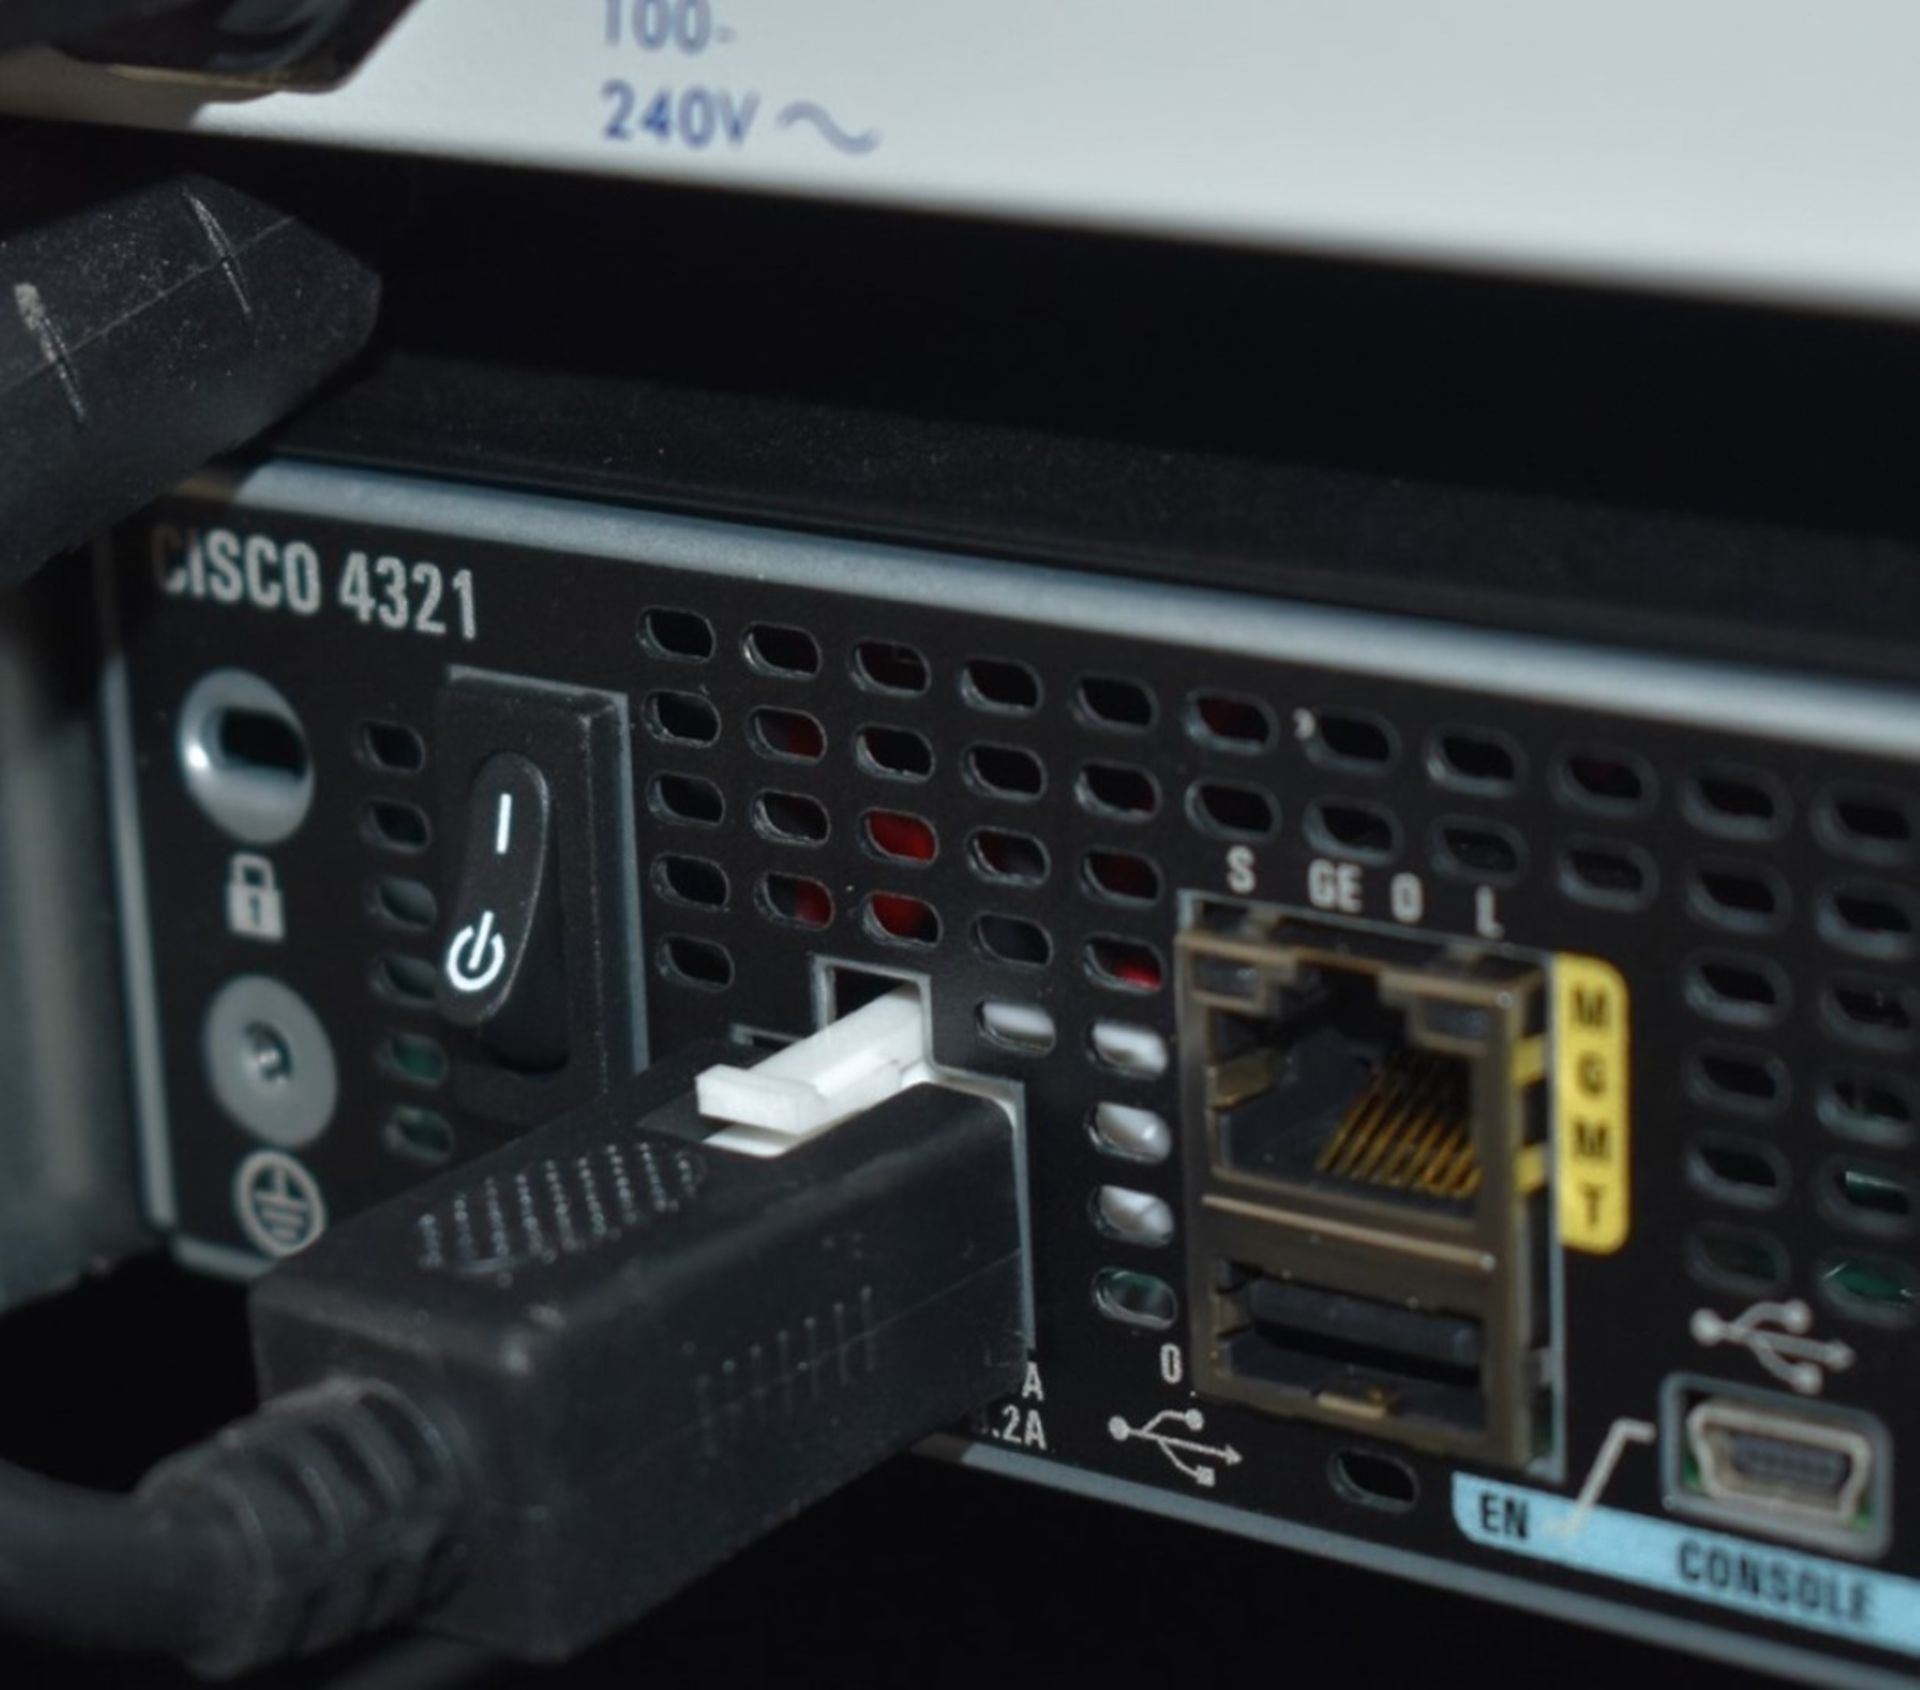 1 x Cisco 4321 Integrated Services Router - Image 3 of 4